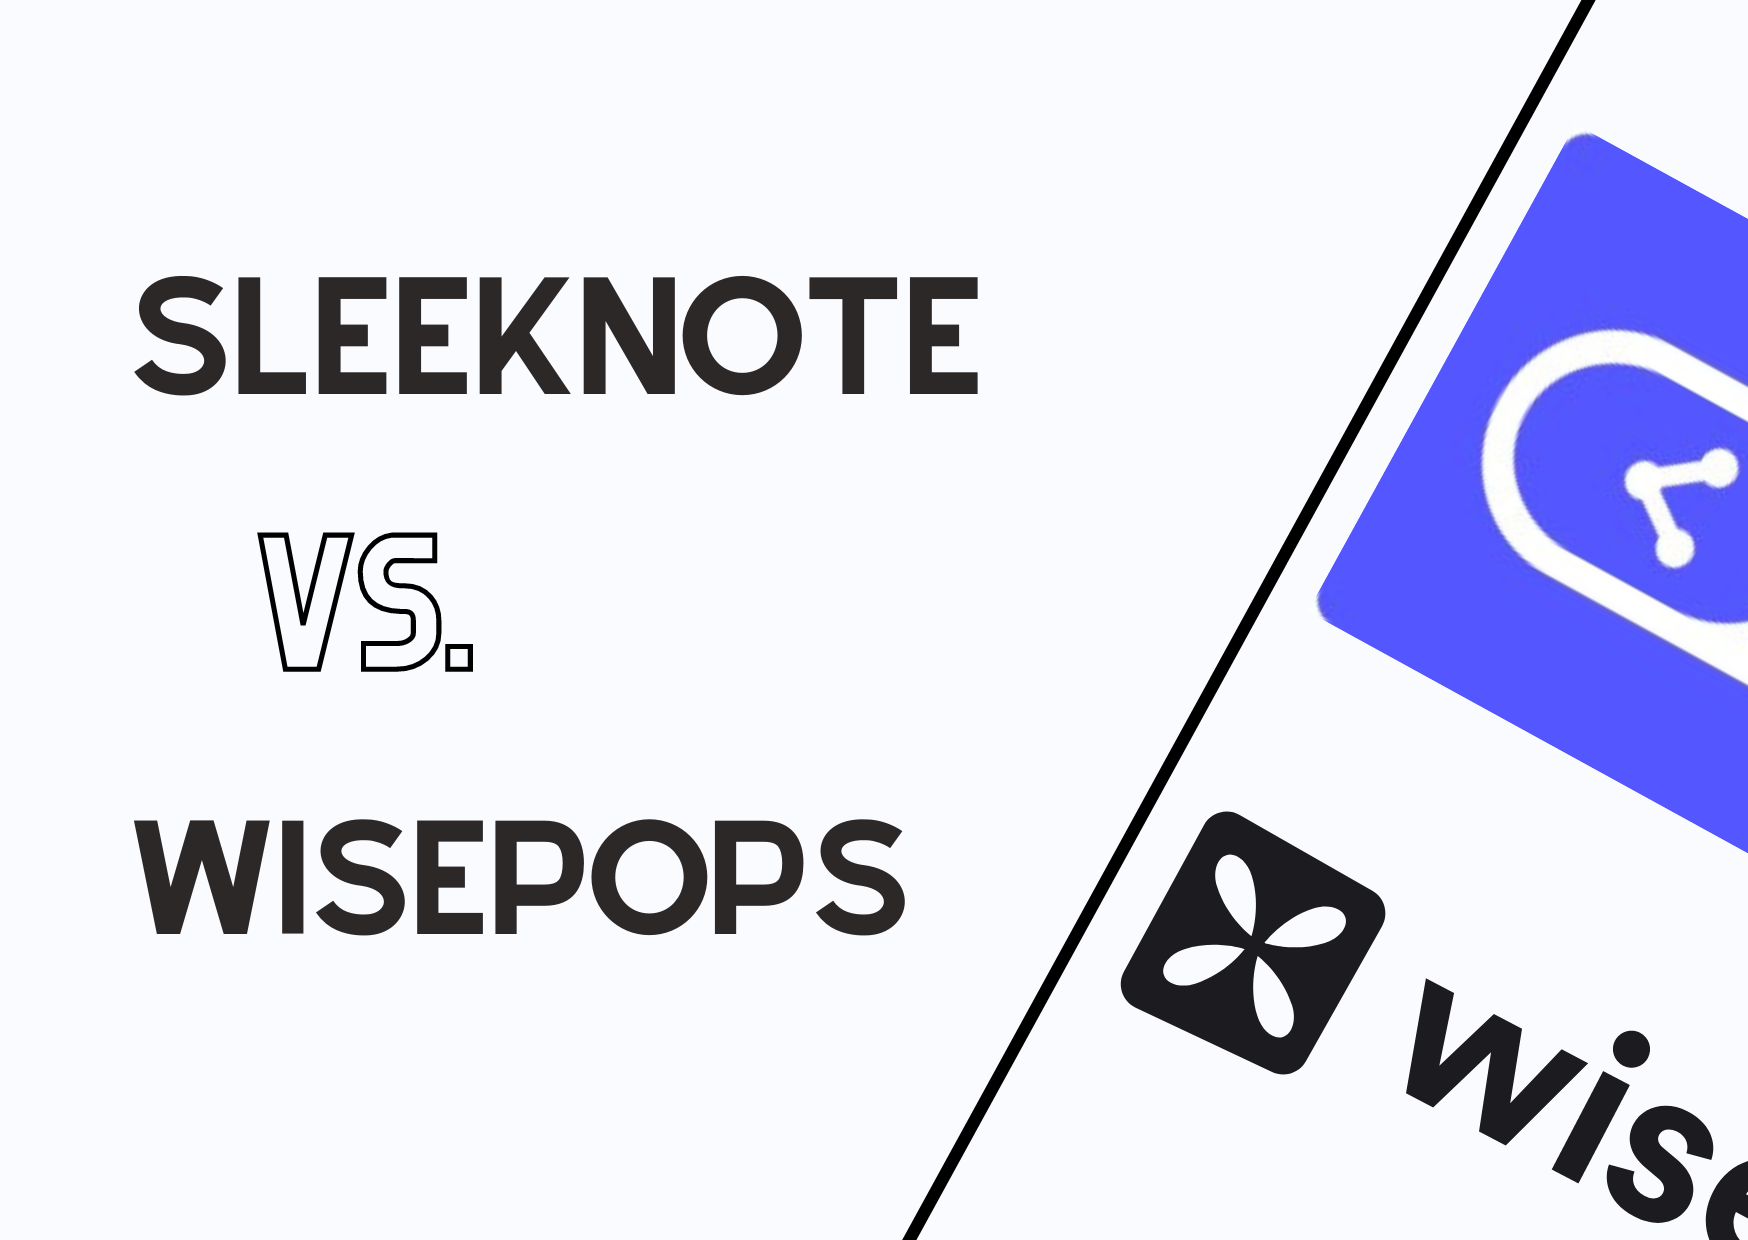 the comparison of Sleeknote vs Wisepops on a fair blue background